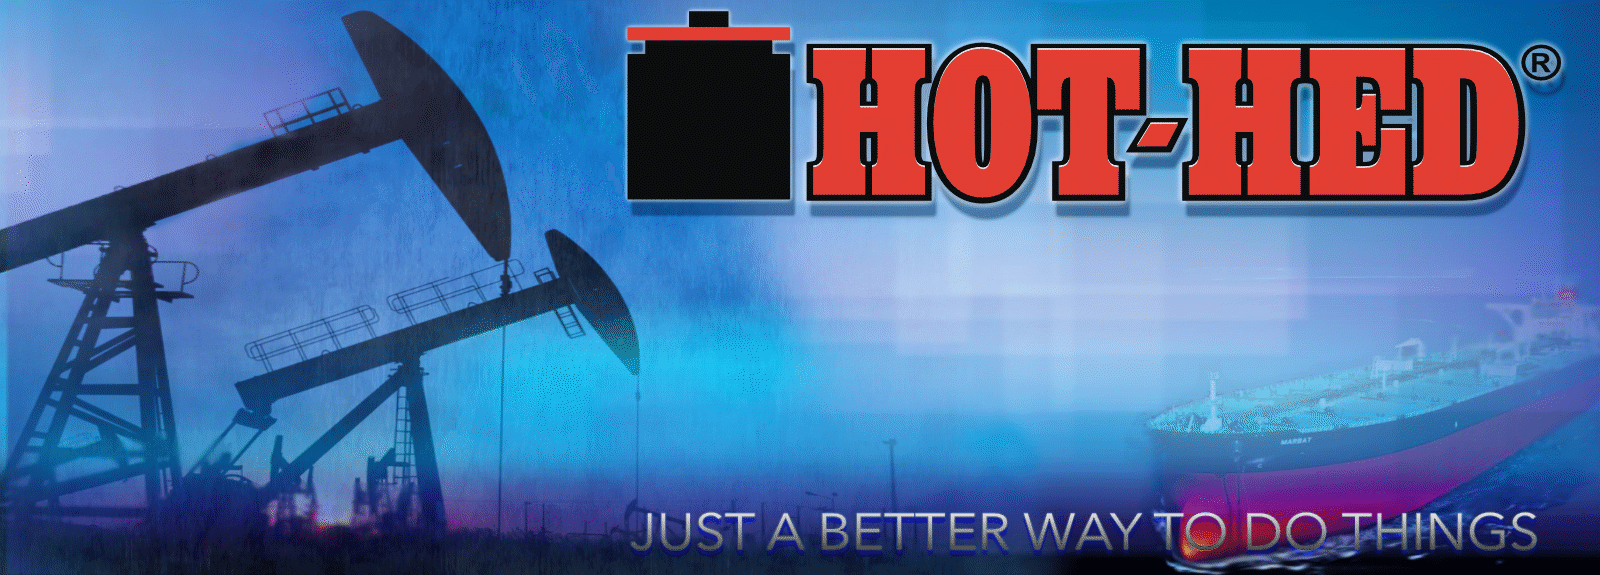 Hot-Hed® International ~ Trusted suppliers to the oil & gas industries for over 40 years